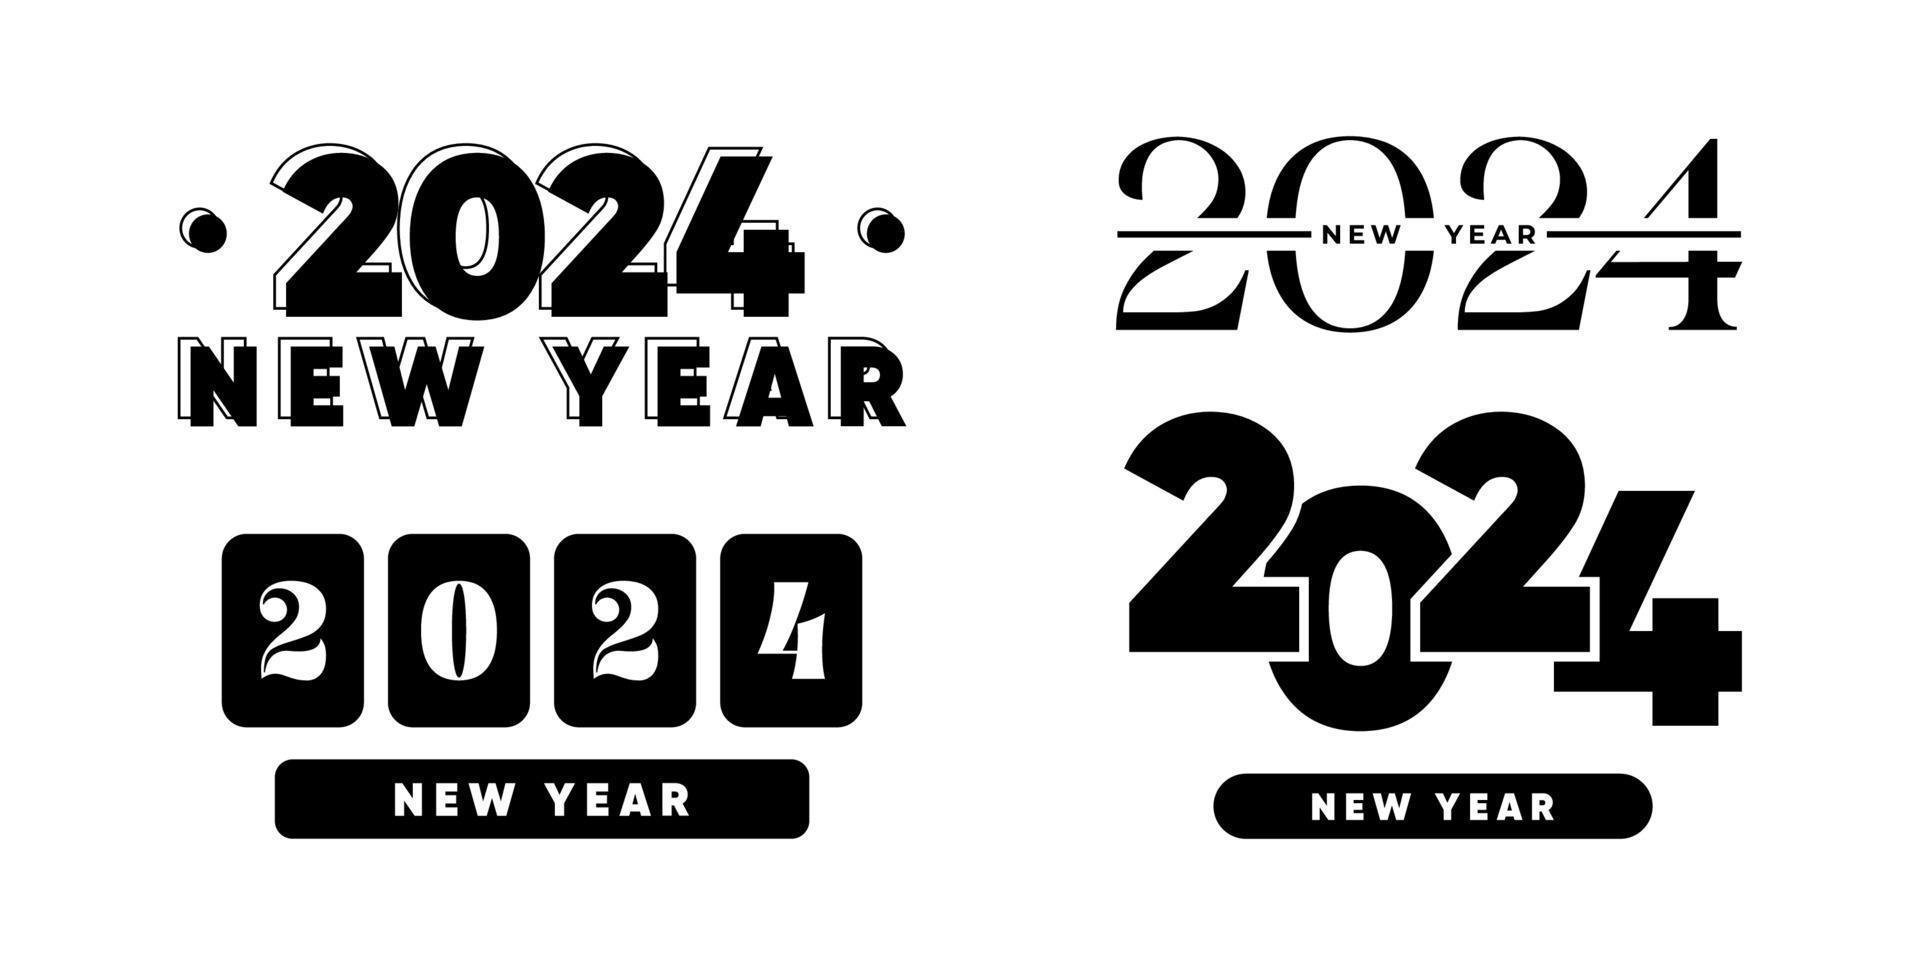 2024 new year logo text design set. 2024 number design template. Calendar simple icon vector